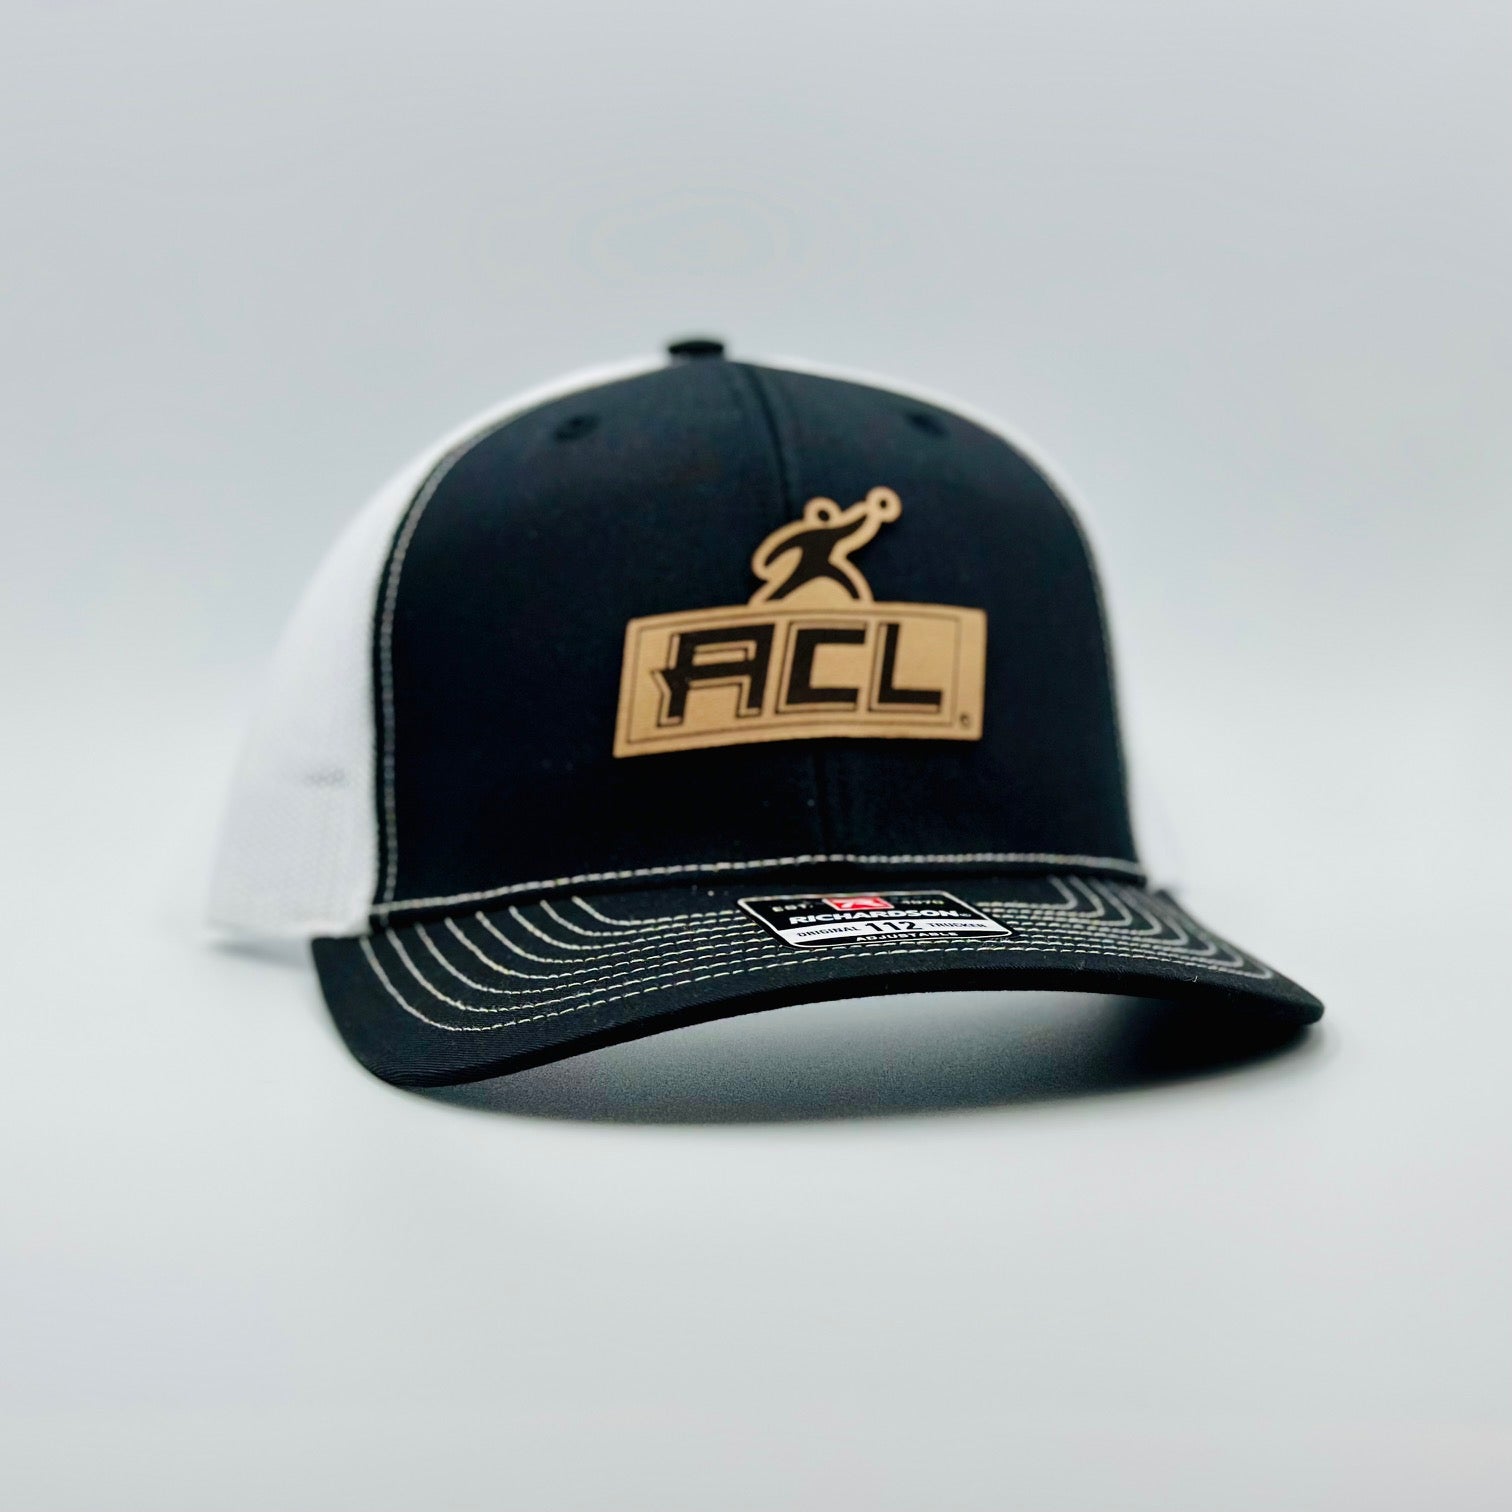 Black/White Hat With Leather Patch